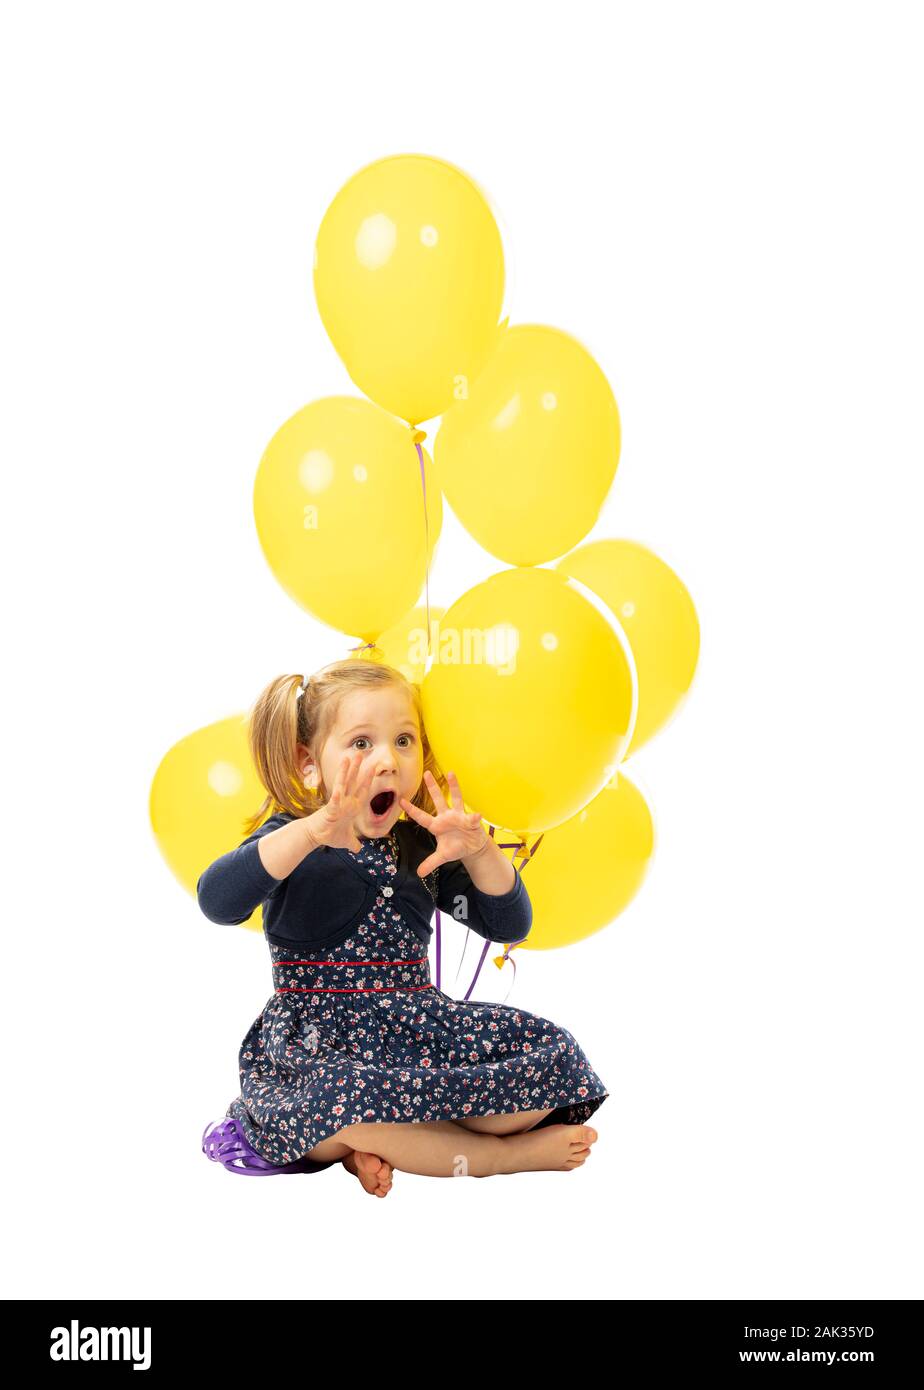 little girl sitting with balloons, playful and surprised expression. isolated on white background. childhood concept. Stock Photo